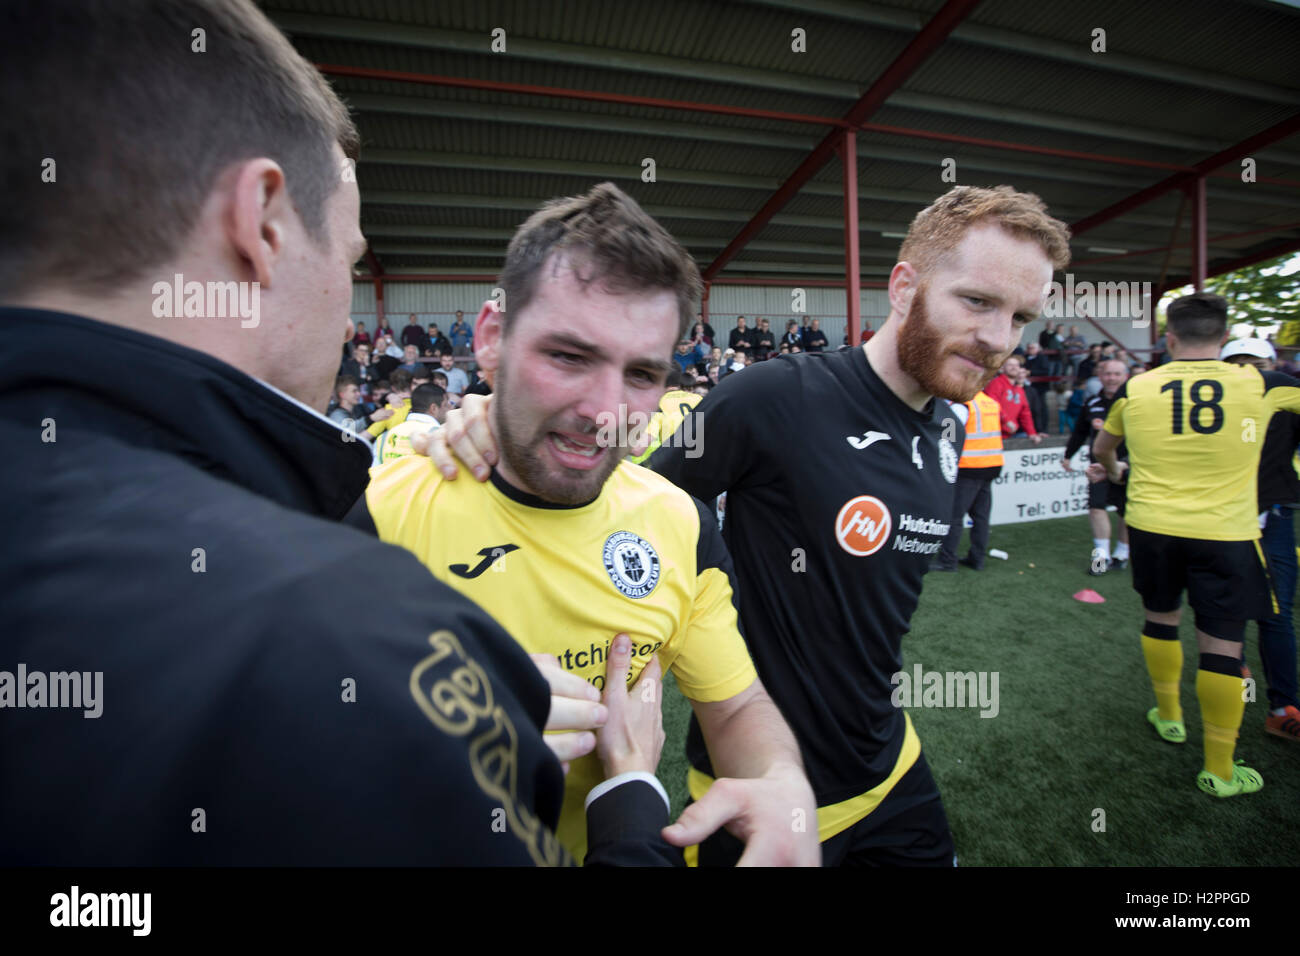 Visiting midfielder Ian McFarland in tears after East Stirlingshire took on Edinburgh City in the second leg of the Scottish League pyramid play-off at Ochilview Park, Stenhousemuir. The play-offs were introduced in 2015 with the winners of the Highland and Lowland Leagues playing-off for the chance to play the club which finished bottom of Scottish League 2. Edinburgh City won the match 1-0 giving them a 2-1 aggregate victory making them the first club in Scottish League history to be promoted into the league. Stock Photo